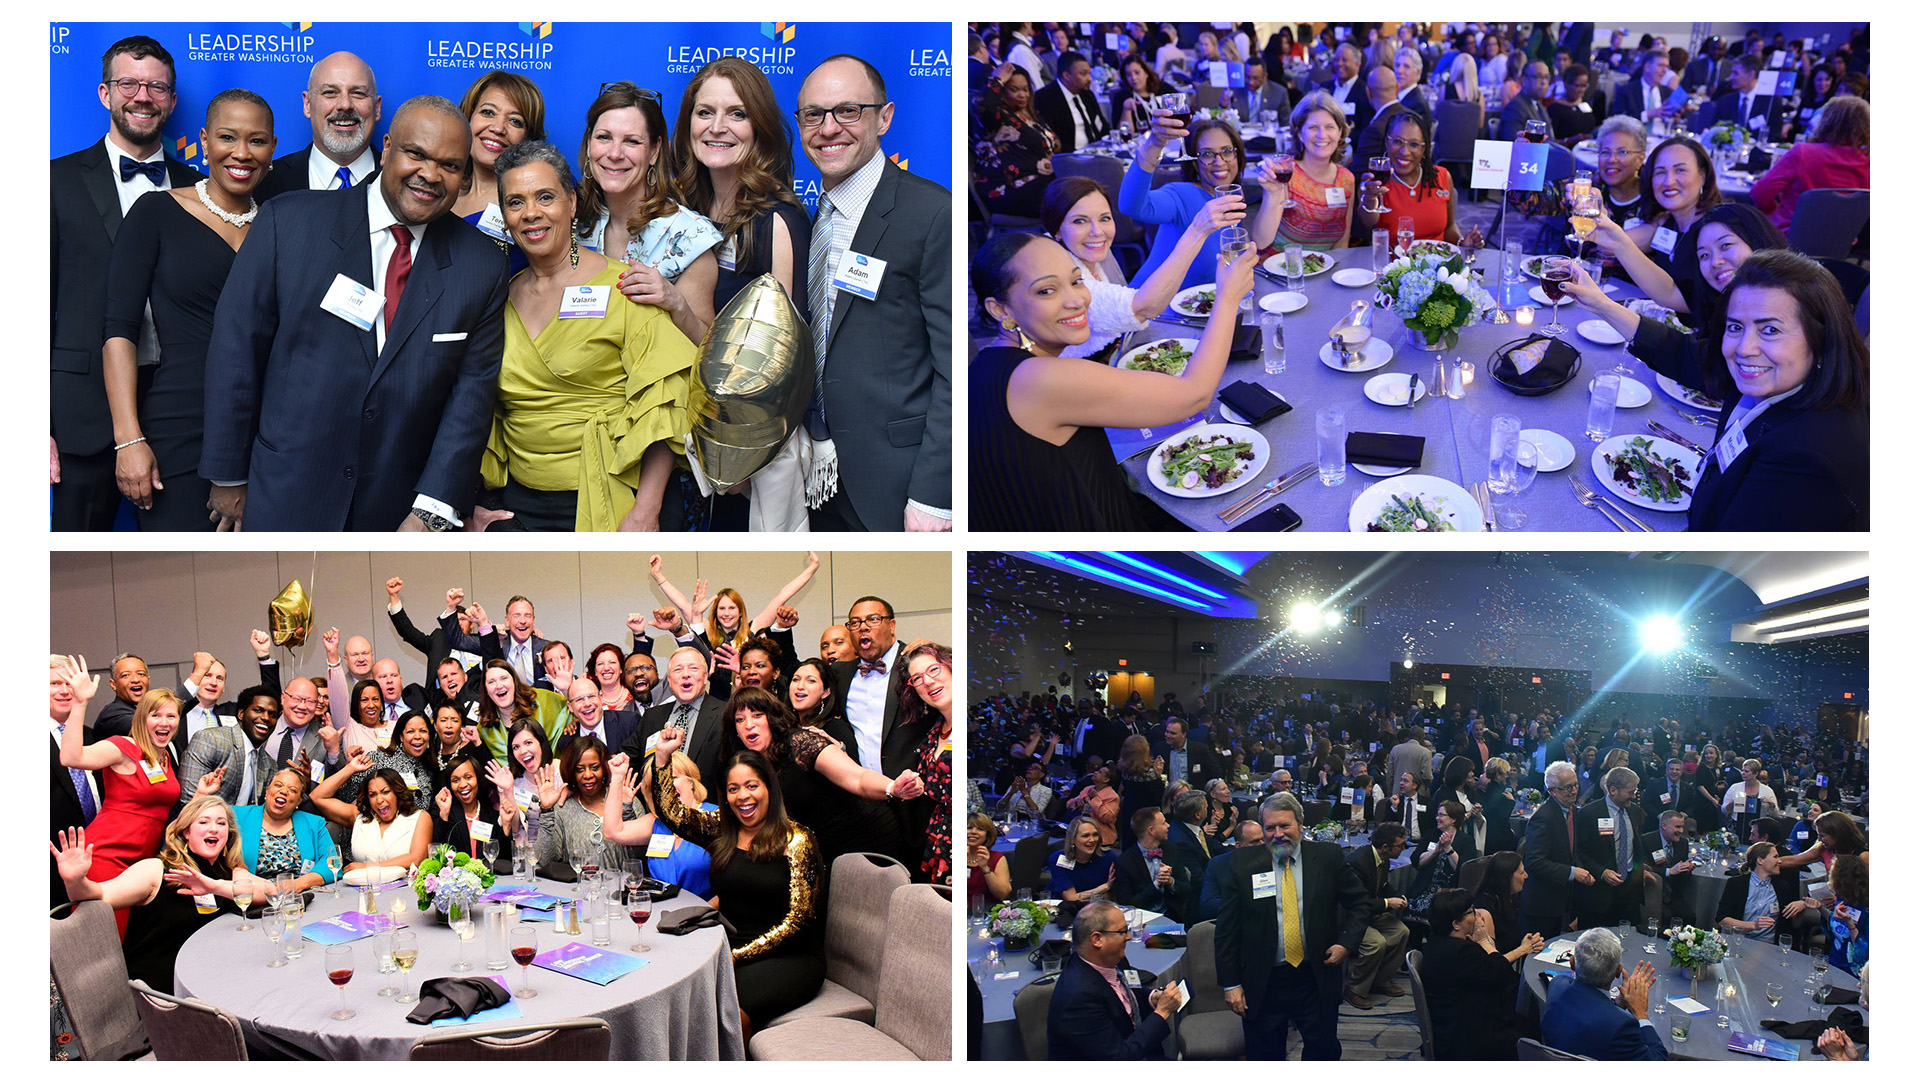 Top 5 Reasons to Attend the 2020 Leadership Awards Dinner